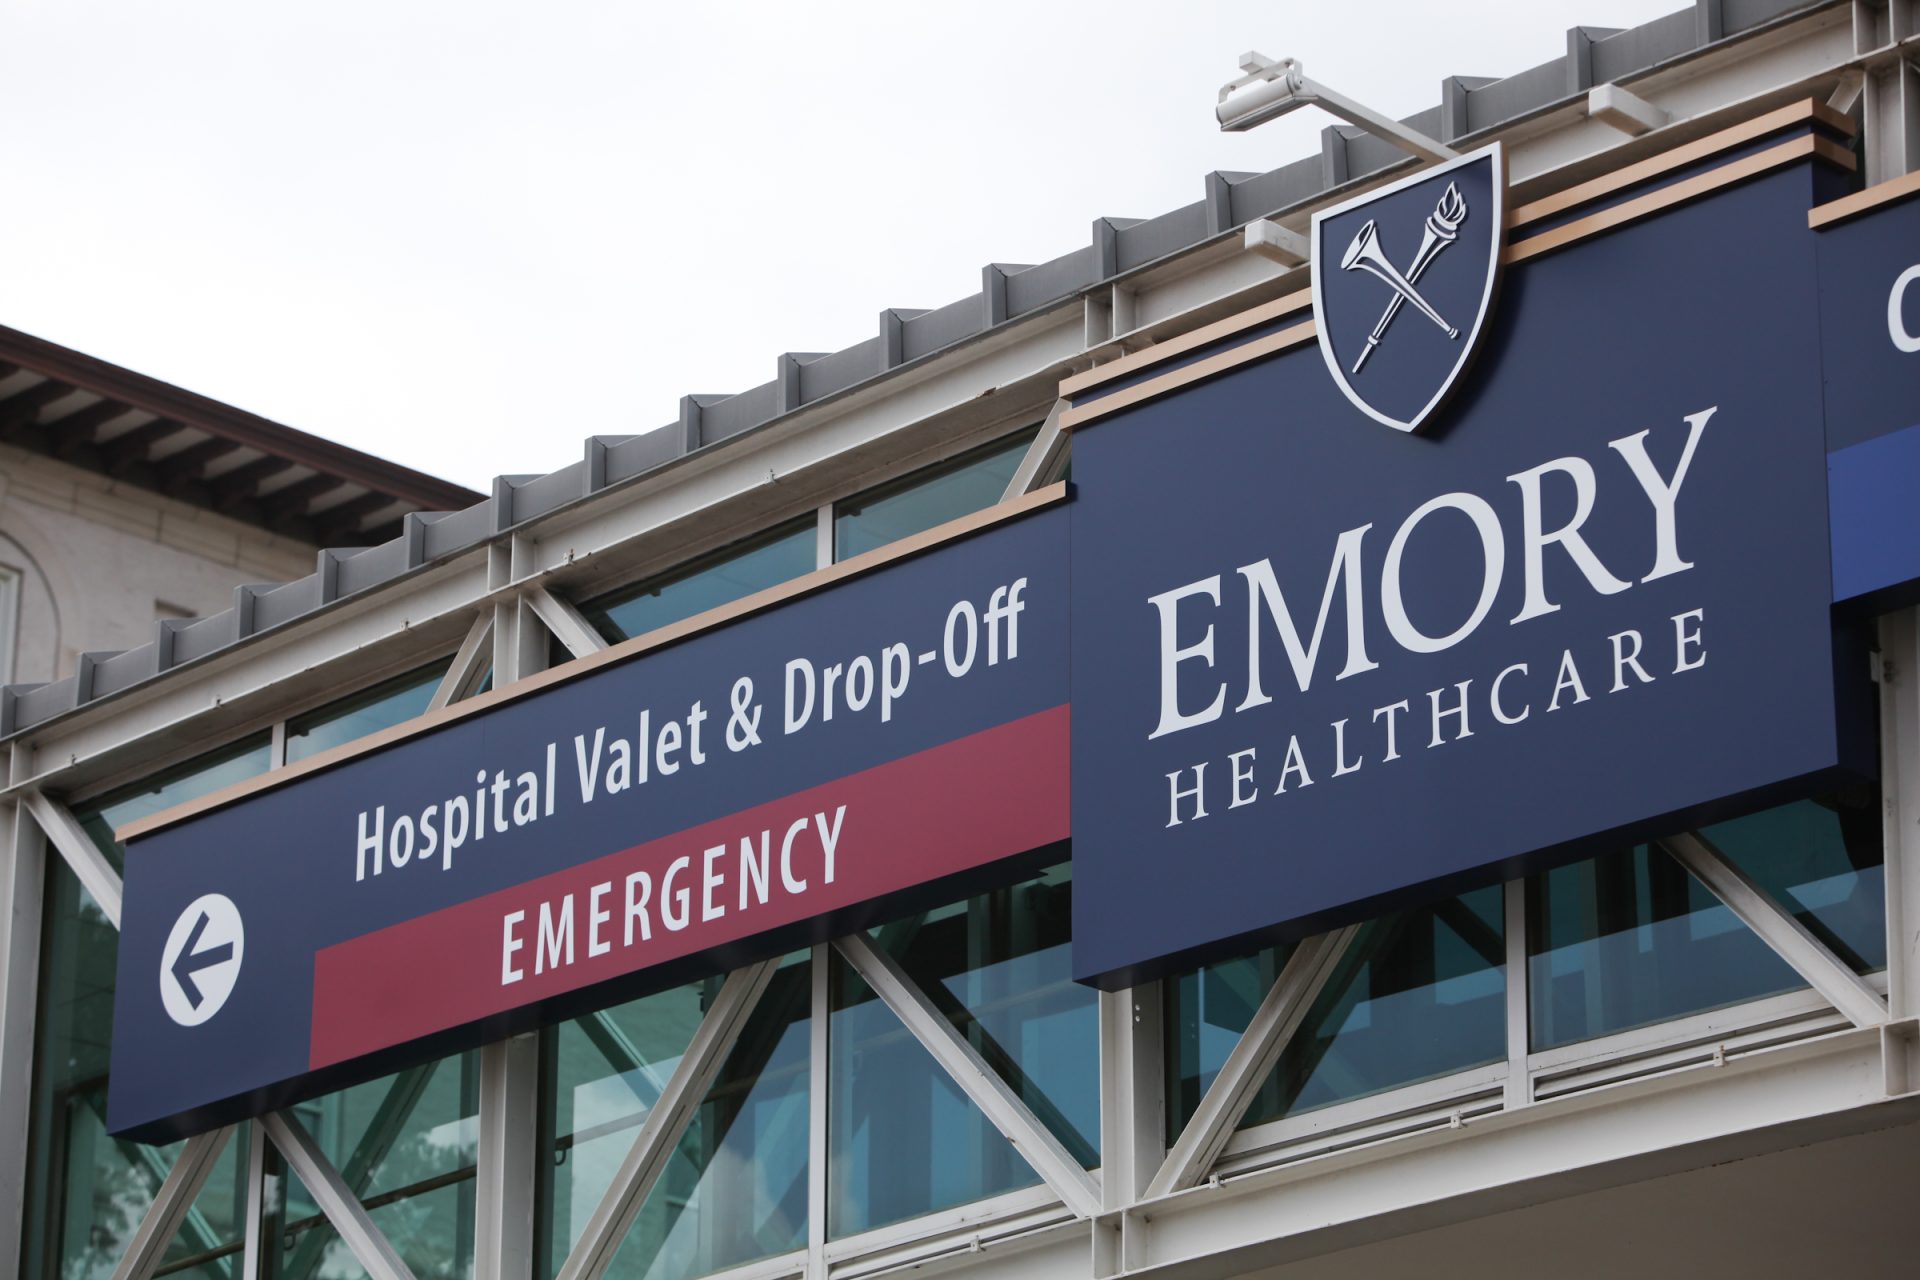 Emory Healthcare Reacts To Viral Video Of Their ‘Former Employees’ Describing ‘Icks’ In Maternity Patients